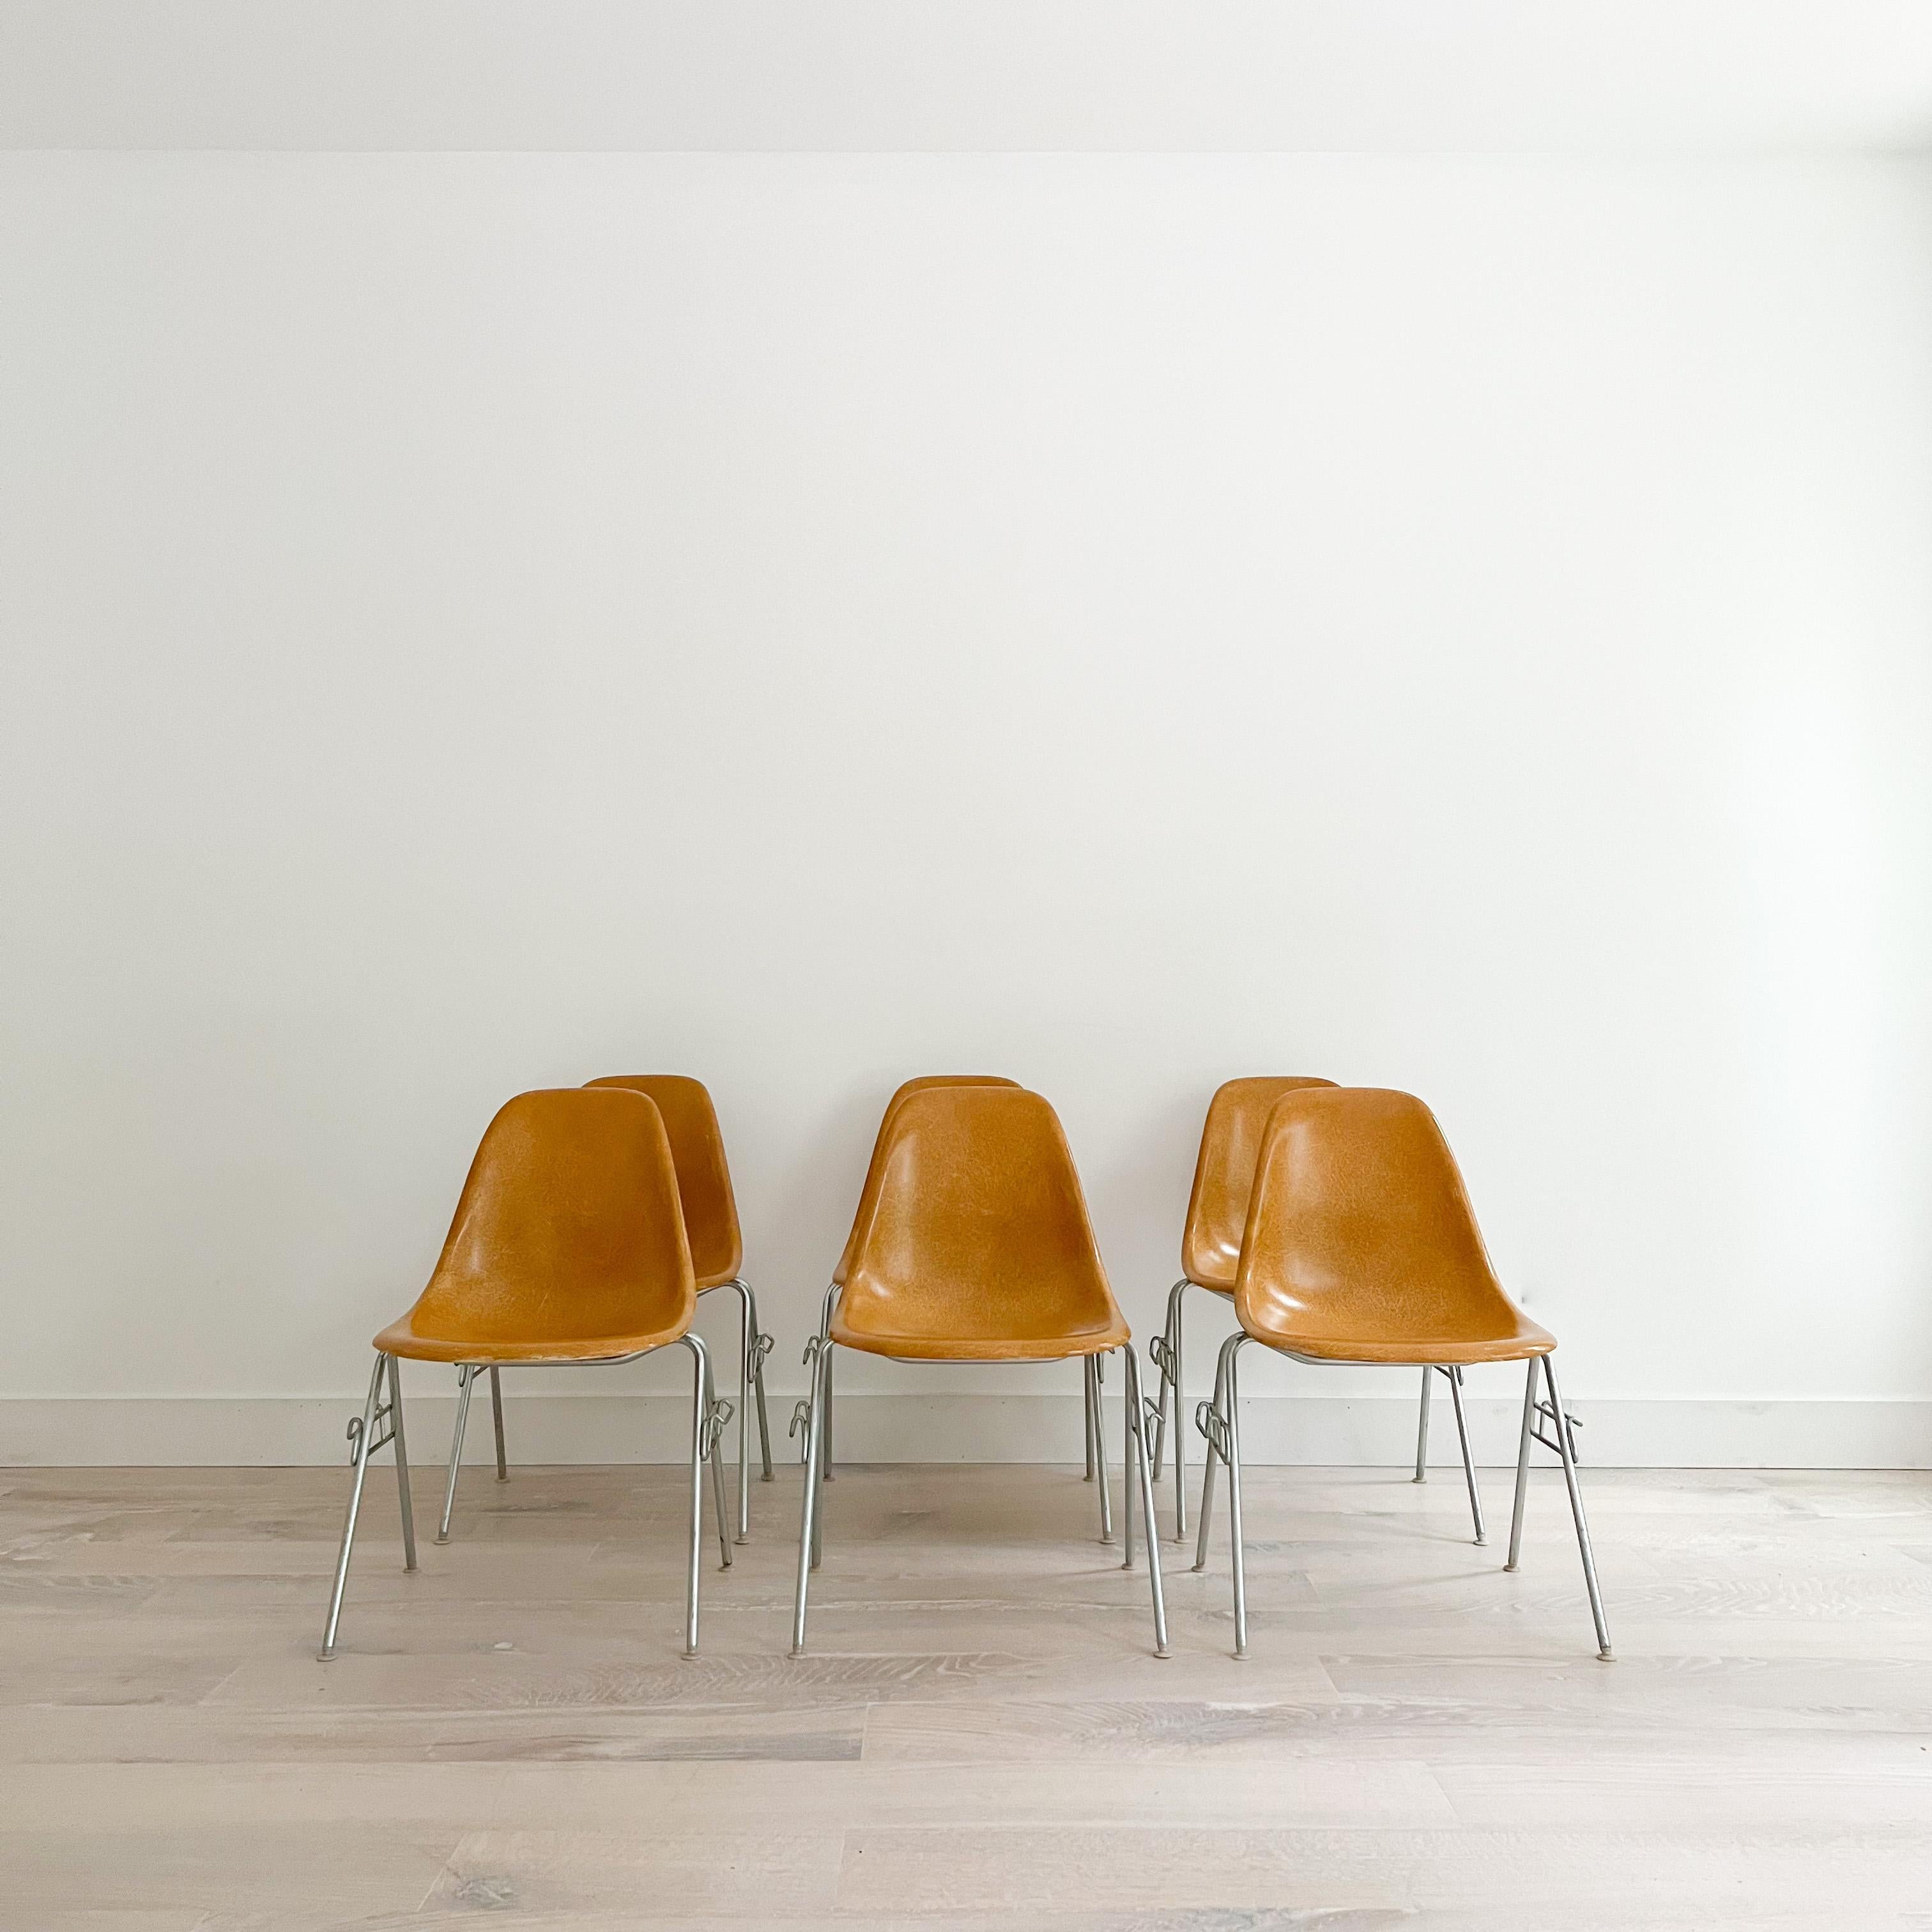 Set of 6 original 1960s molded fiberglass light ochre shell chairs on stacking base, designed by Charles and Ray Eames for Herman Miller. Gleaming shells are in original condition, each with a distinct thready texture. Shown here mounted on